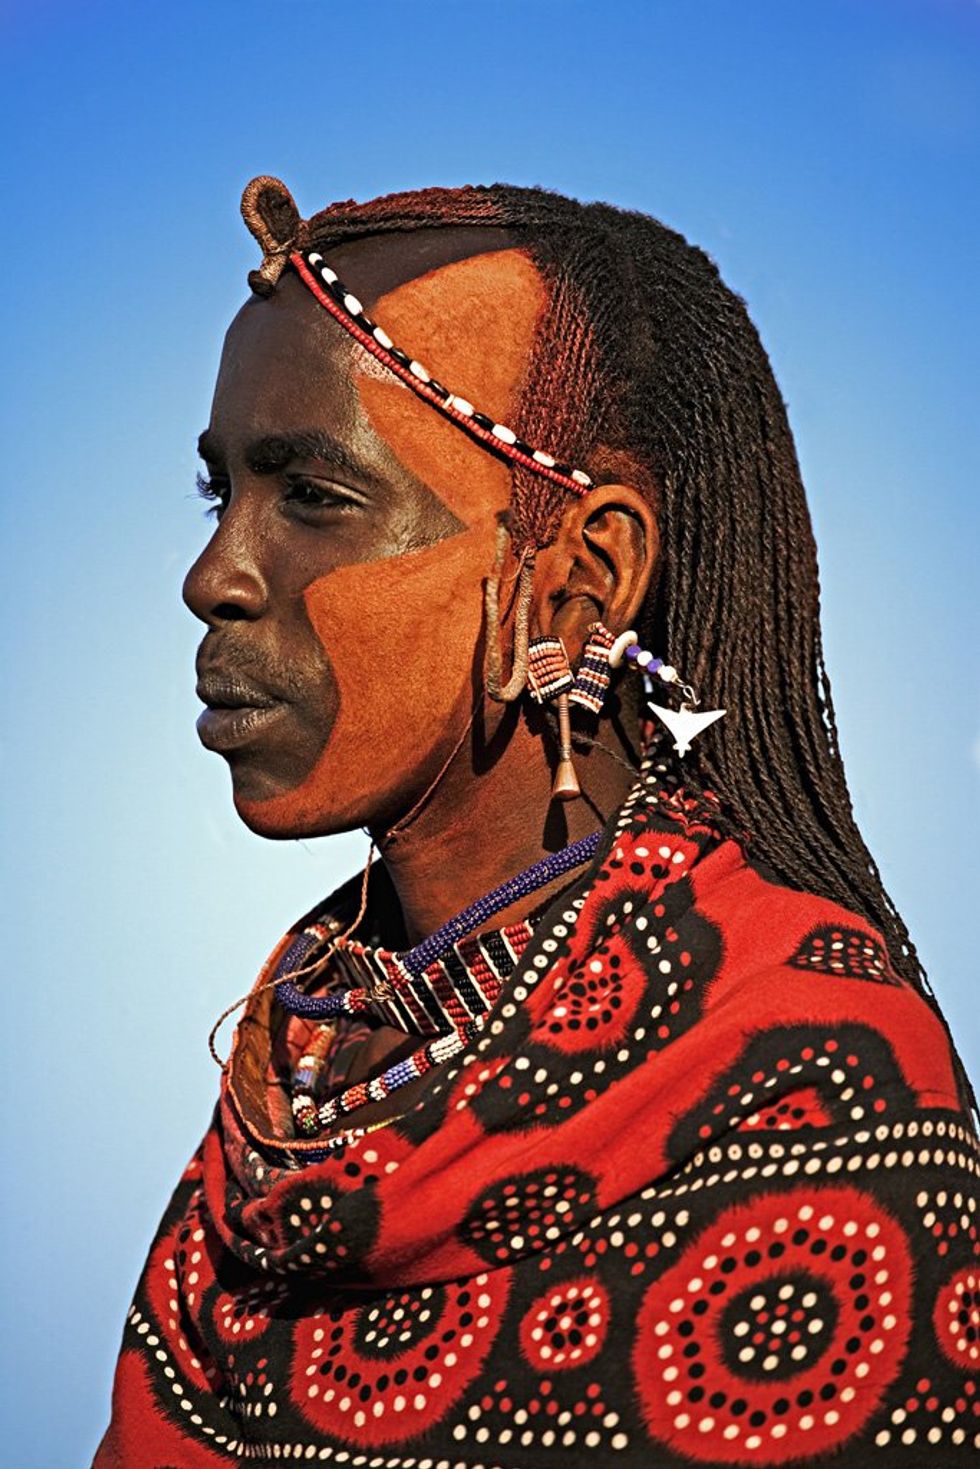 \u200bMaasai people. Men commonly mix ochre and oil to color their hair and skin red. Near Amboseli National Park, Kenya